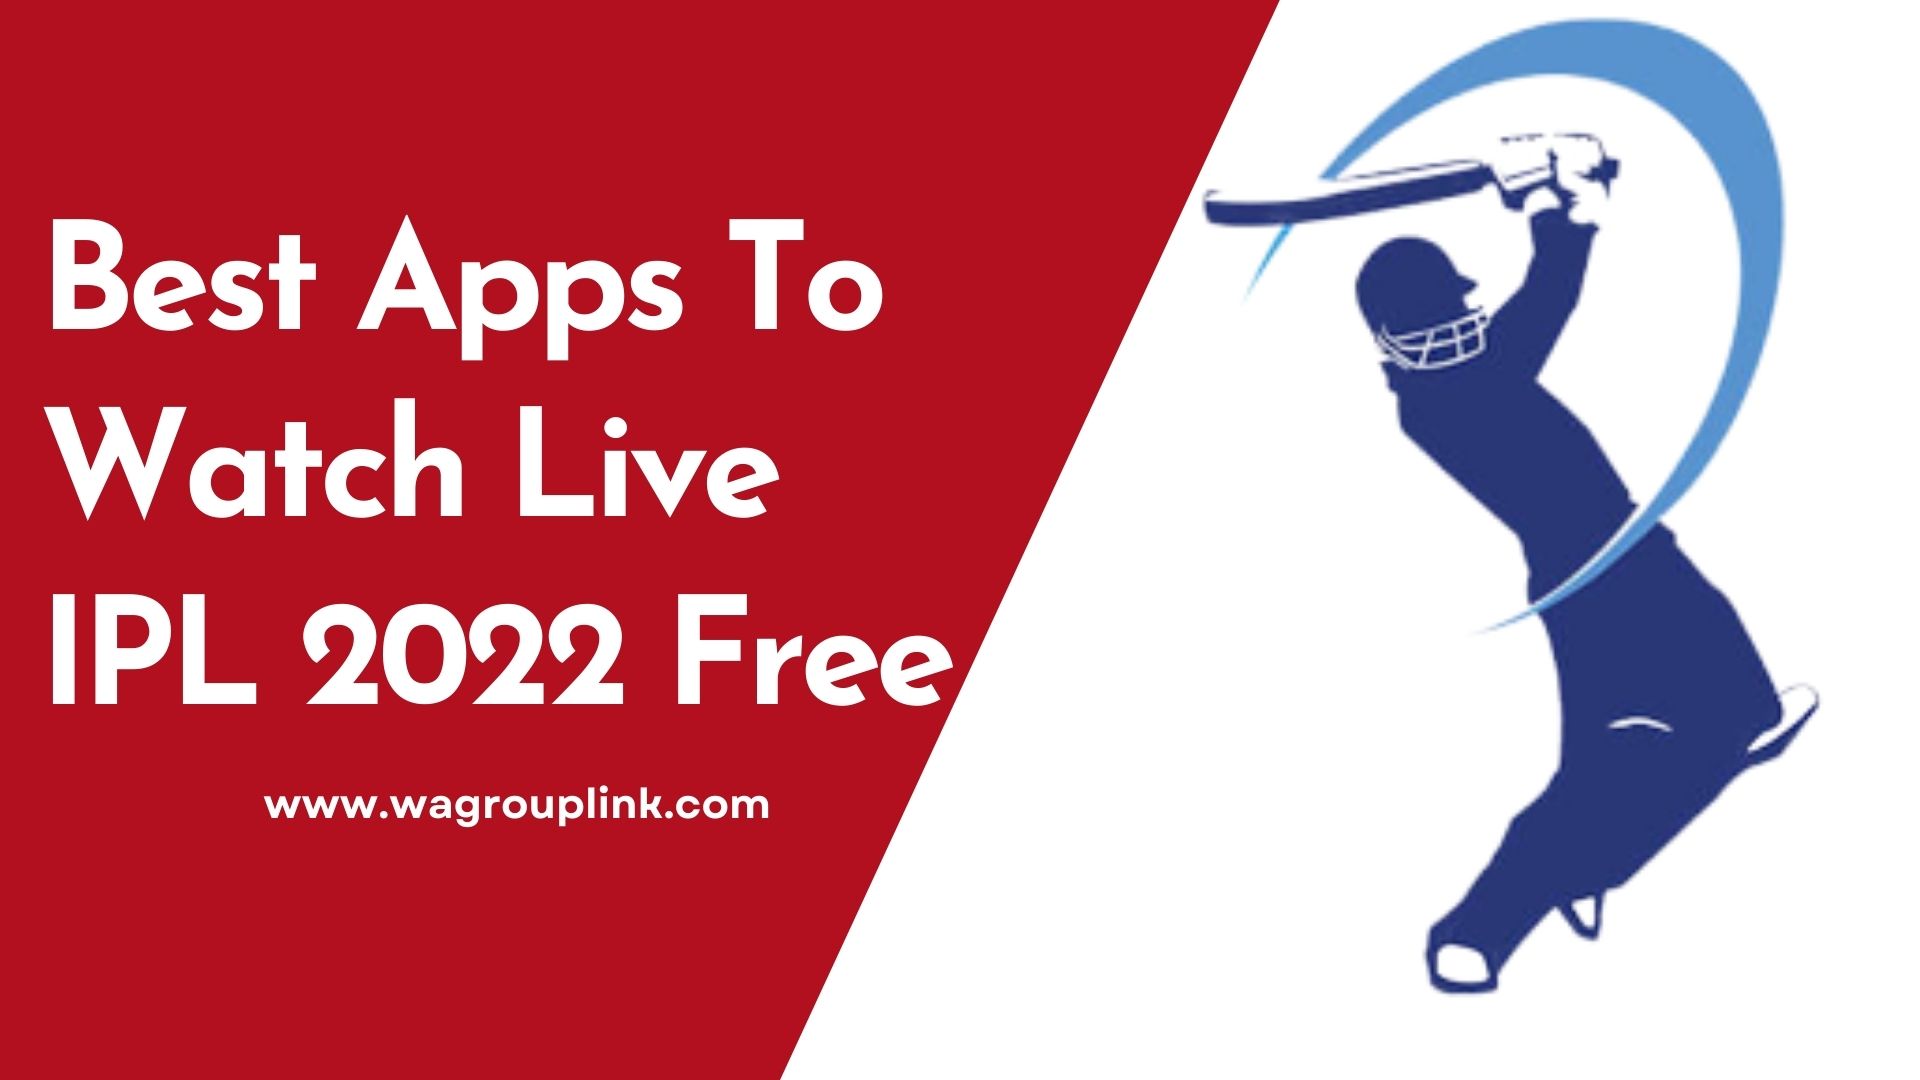 Top 10 Best Apps To Watch Live IPL 2022 Free